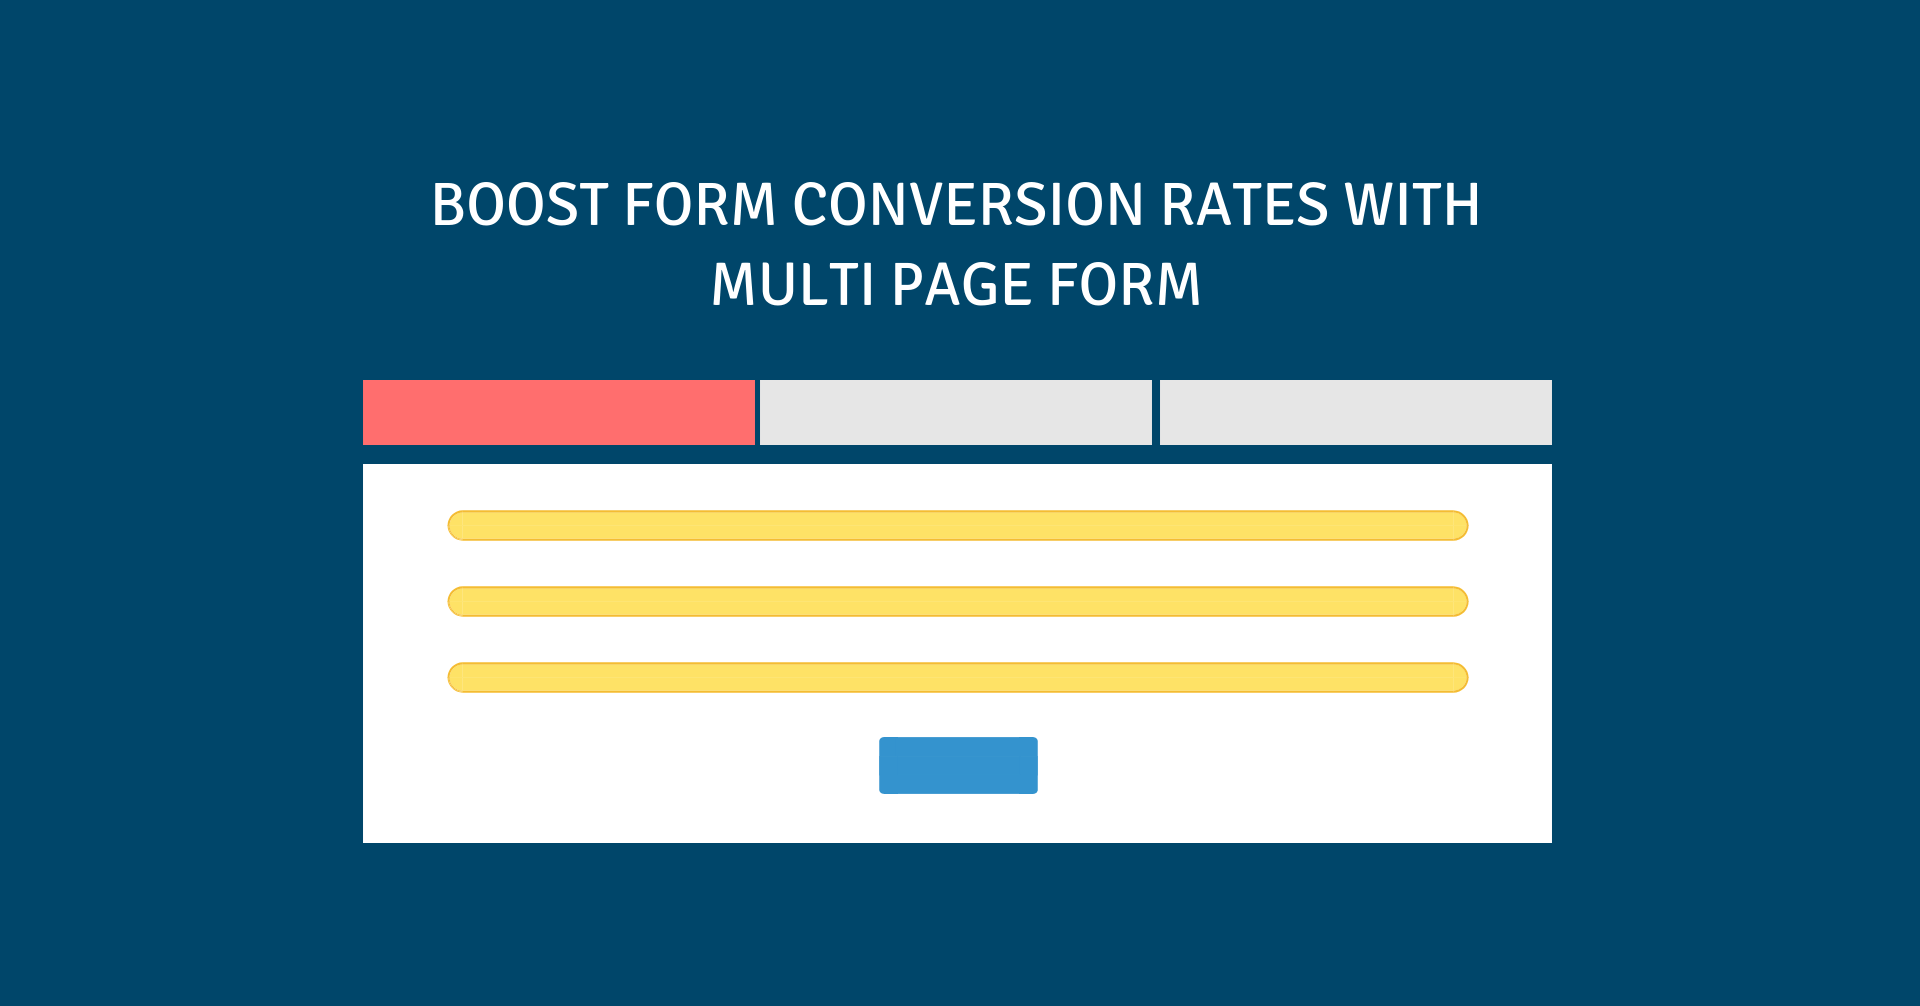 Multi page form